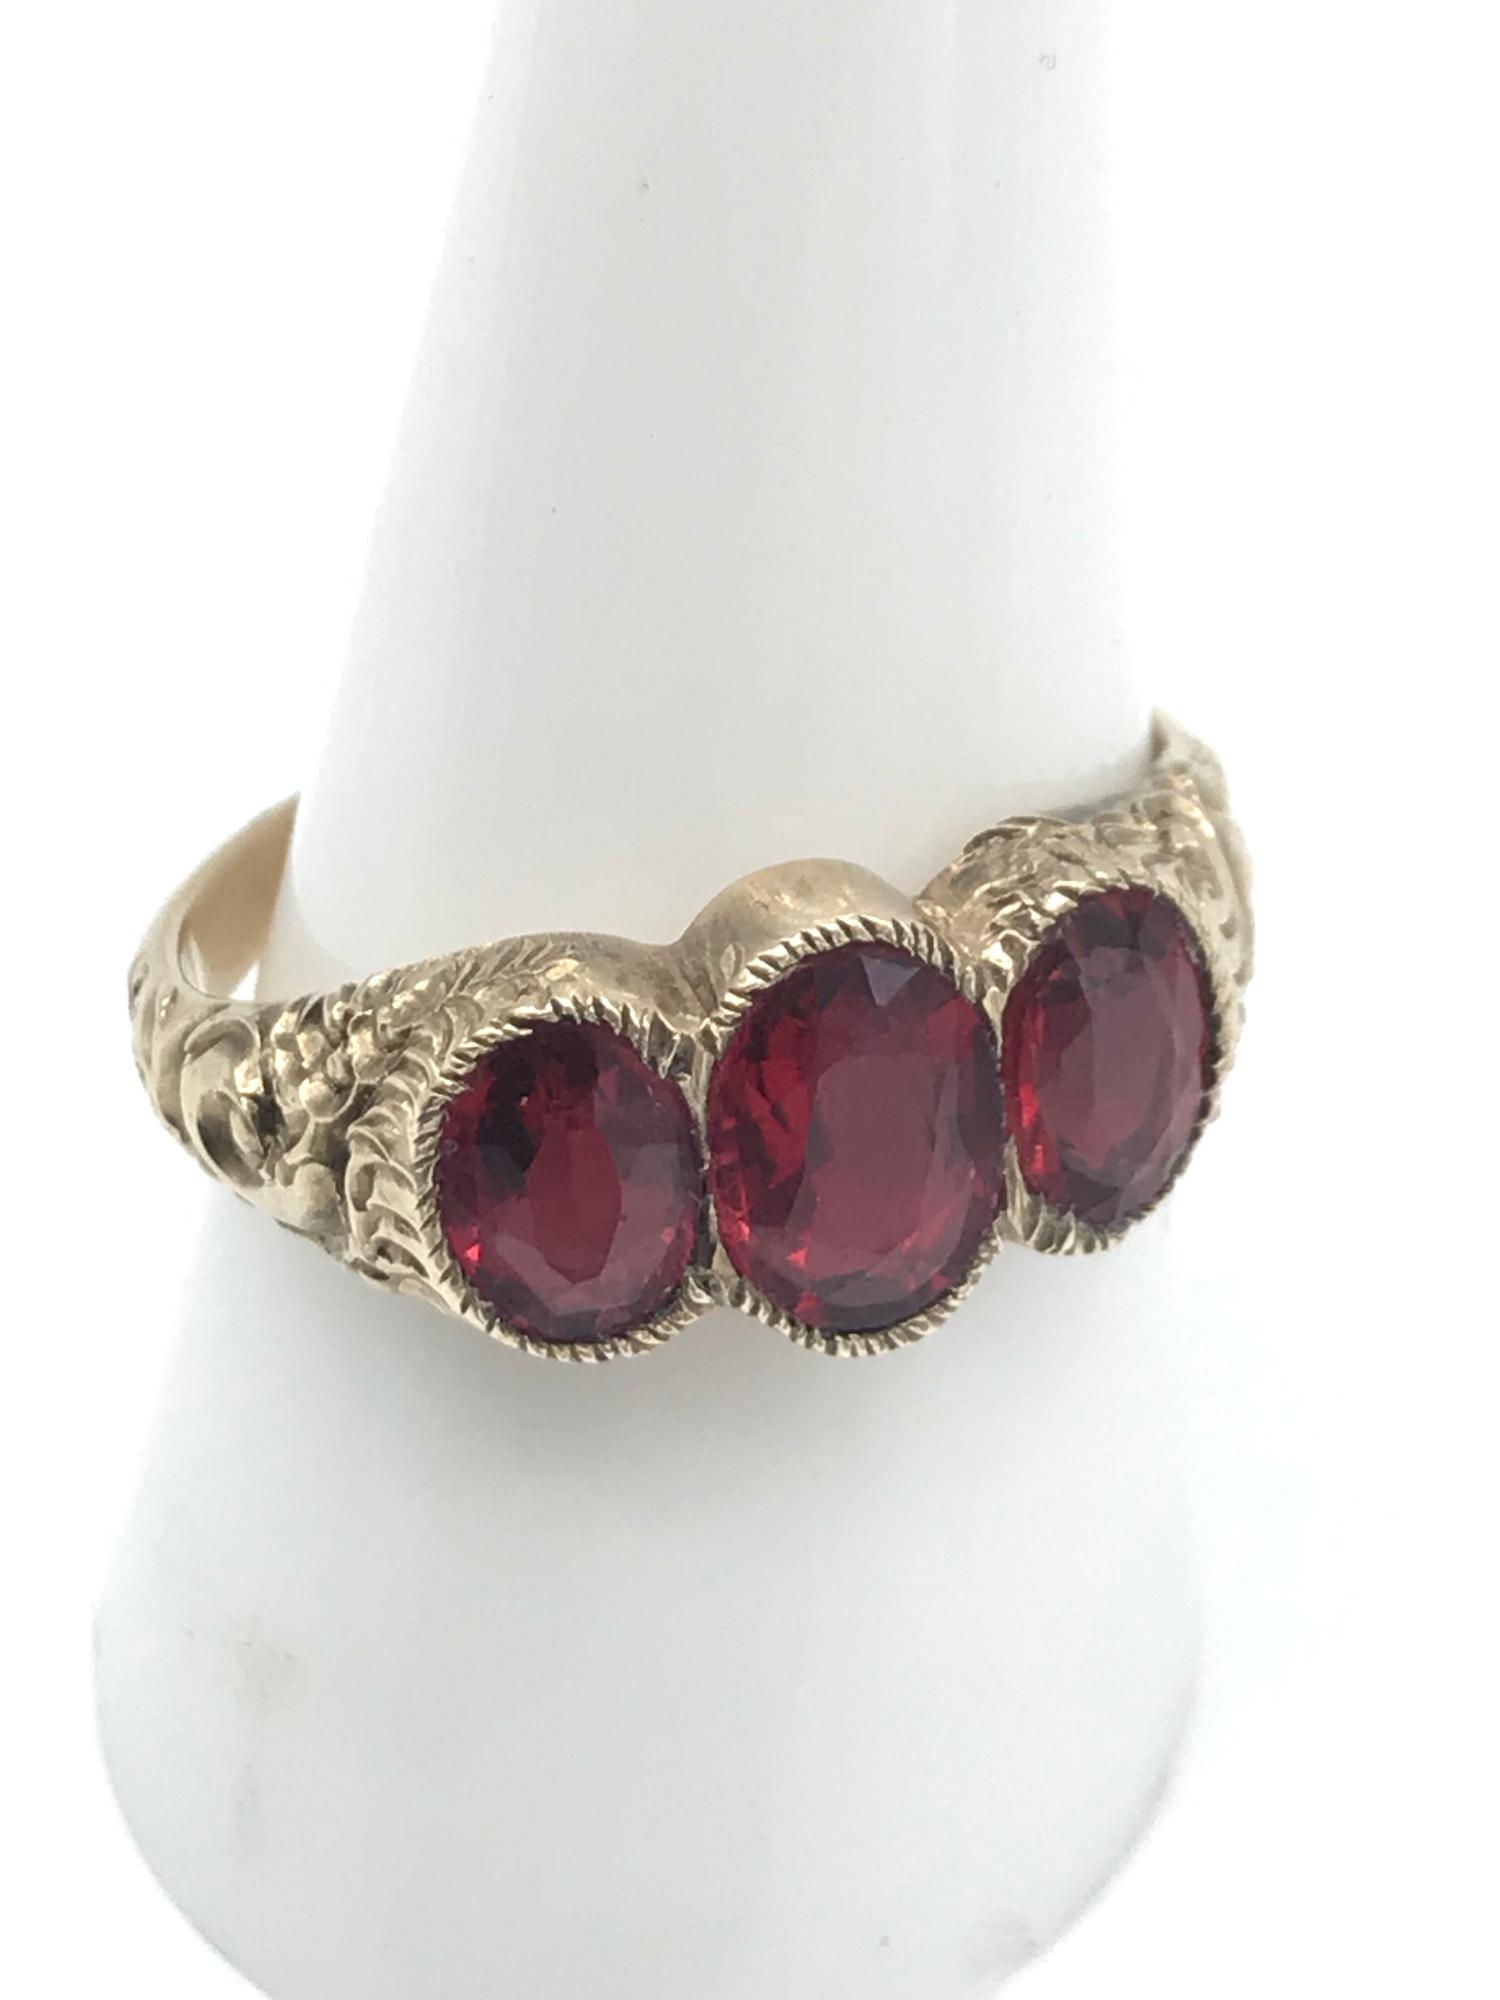 A Victorian ornate ladies gold ring set with 3 large ruby stones, Ring size P, Largest measures